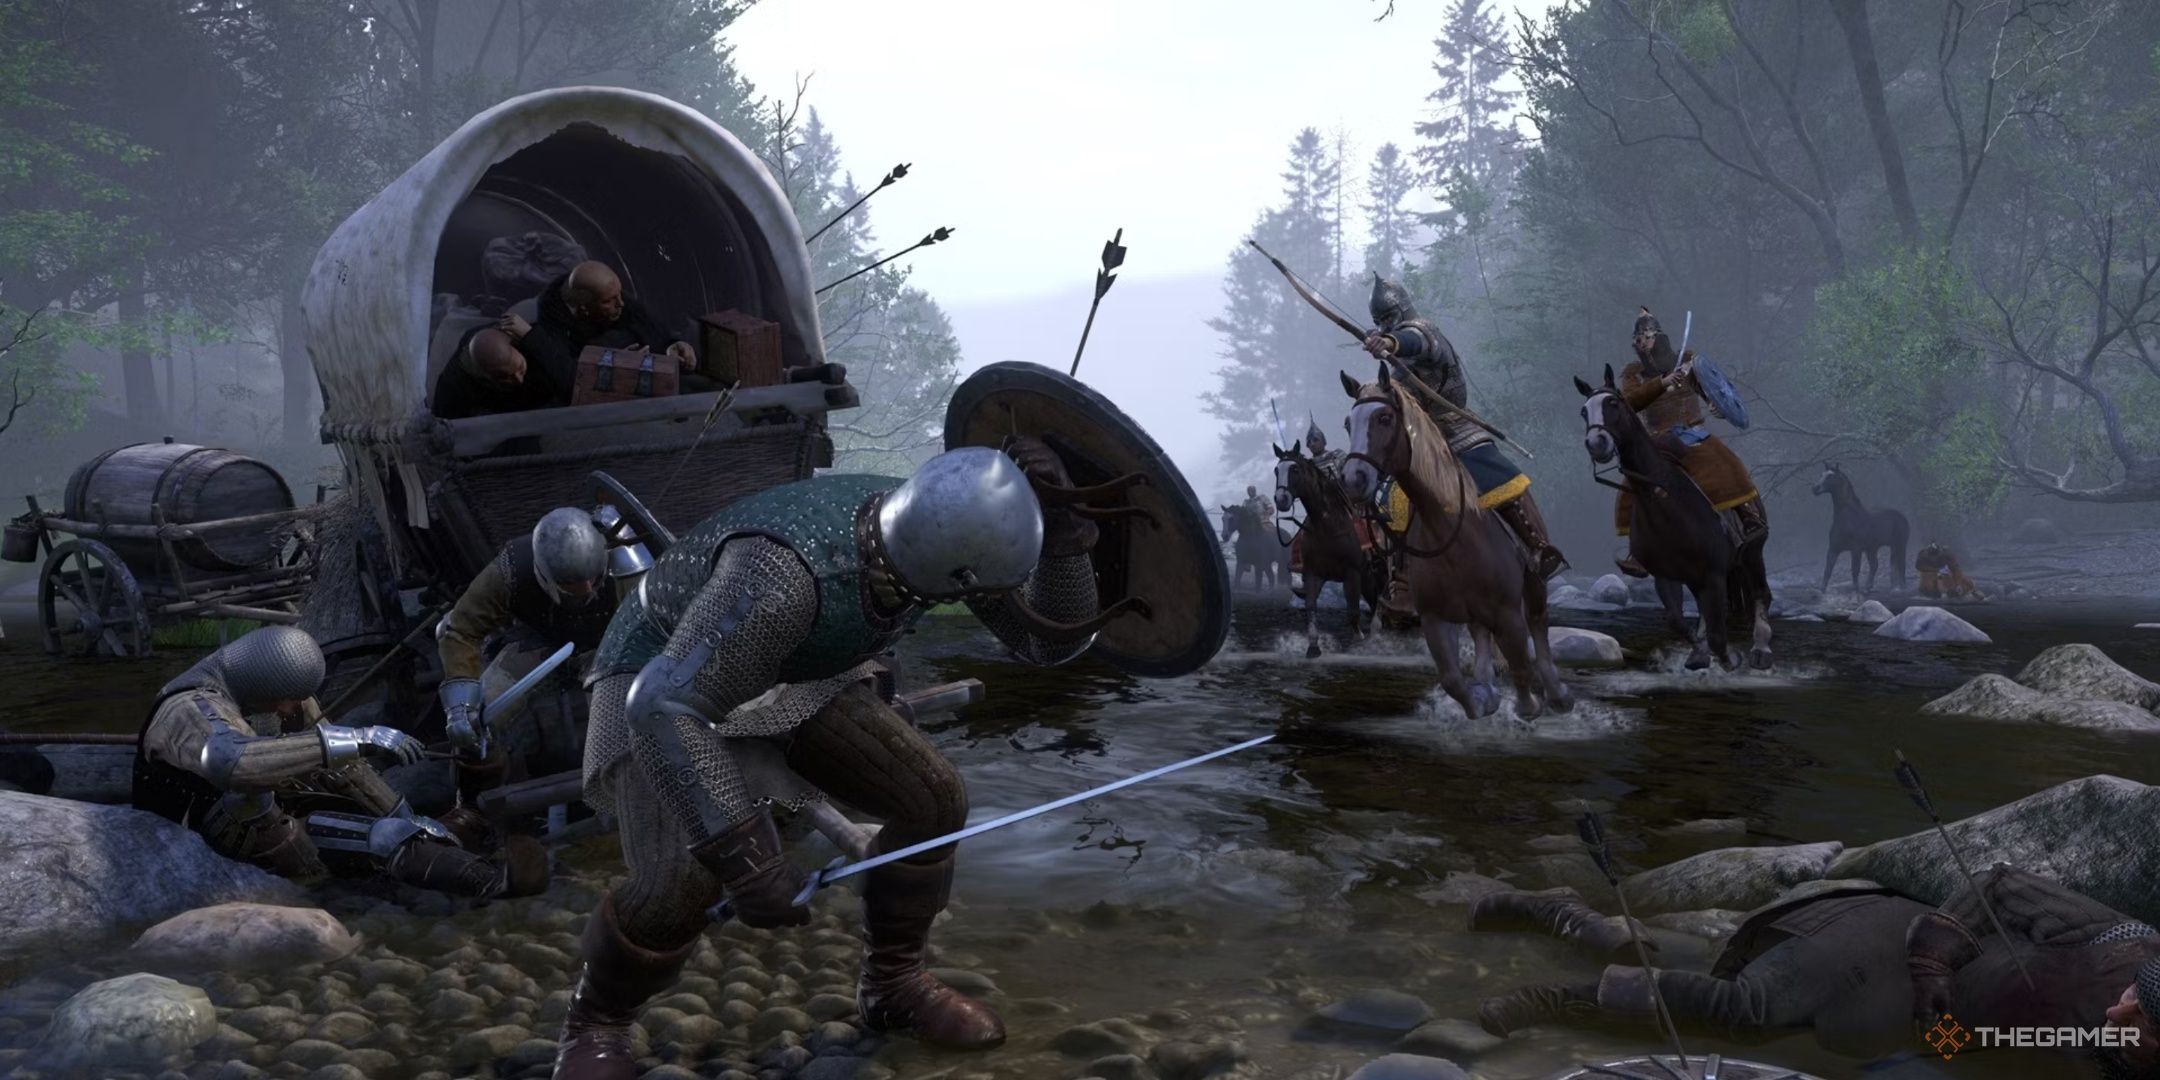 Kingdom Come Deliverance scene showing a soldier guarding with a shield while archers on horseback fire at him